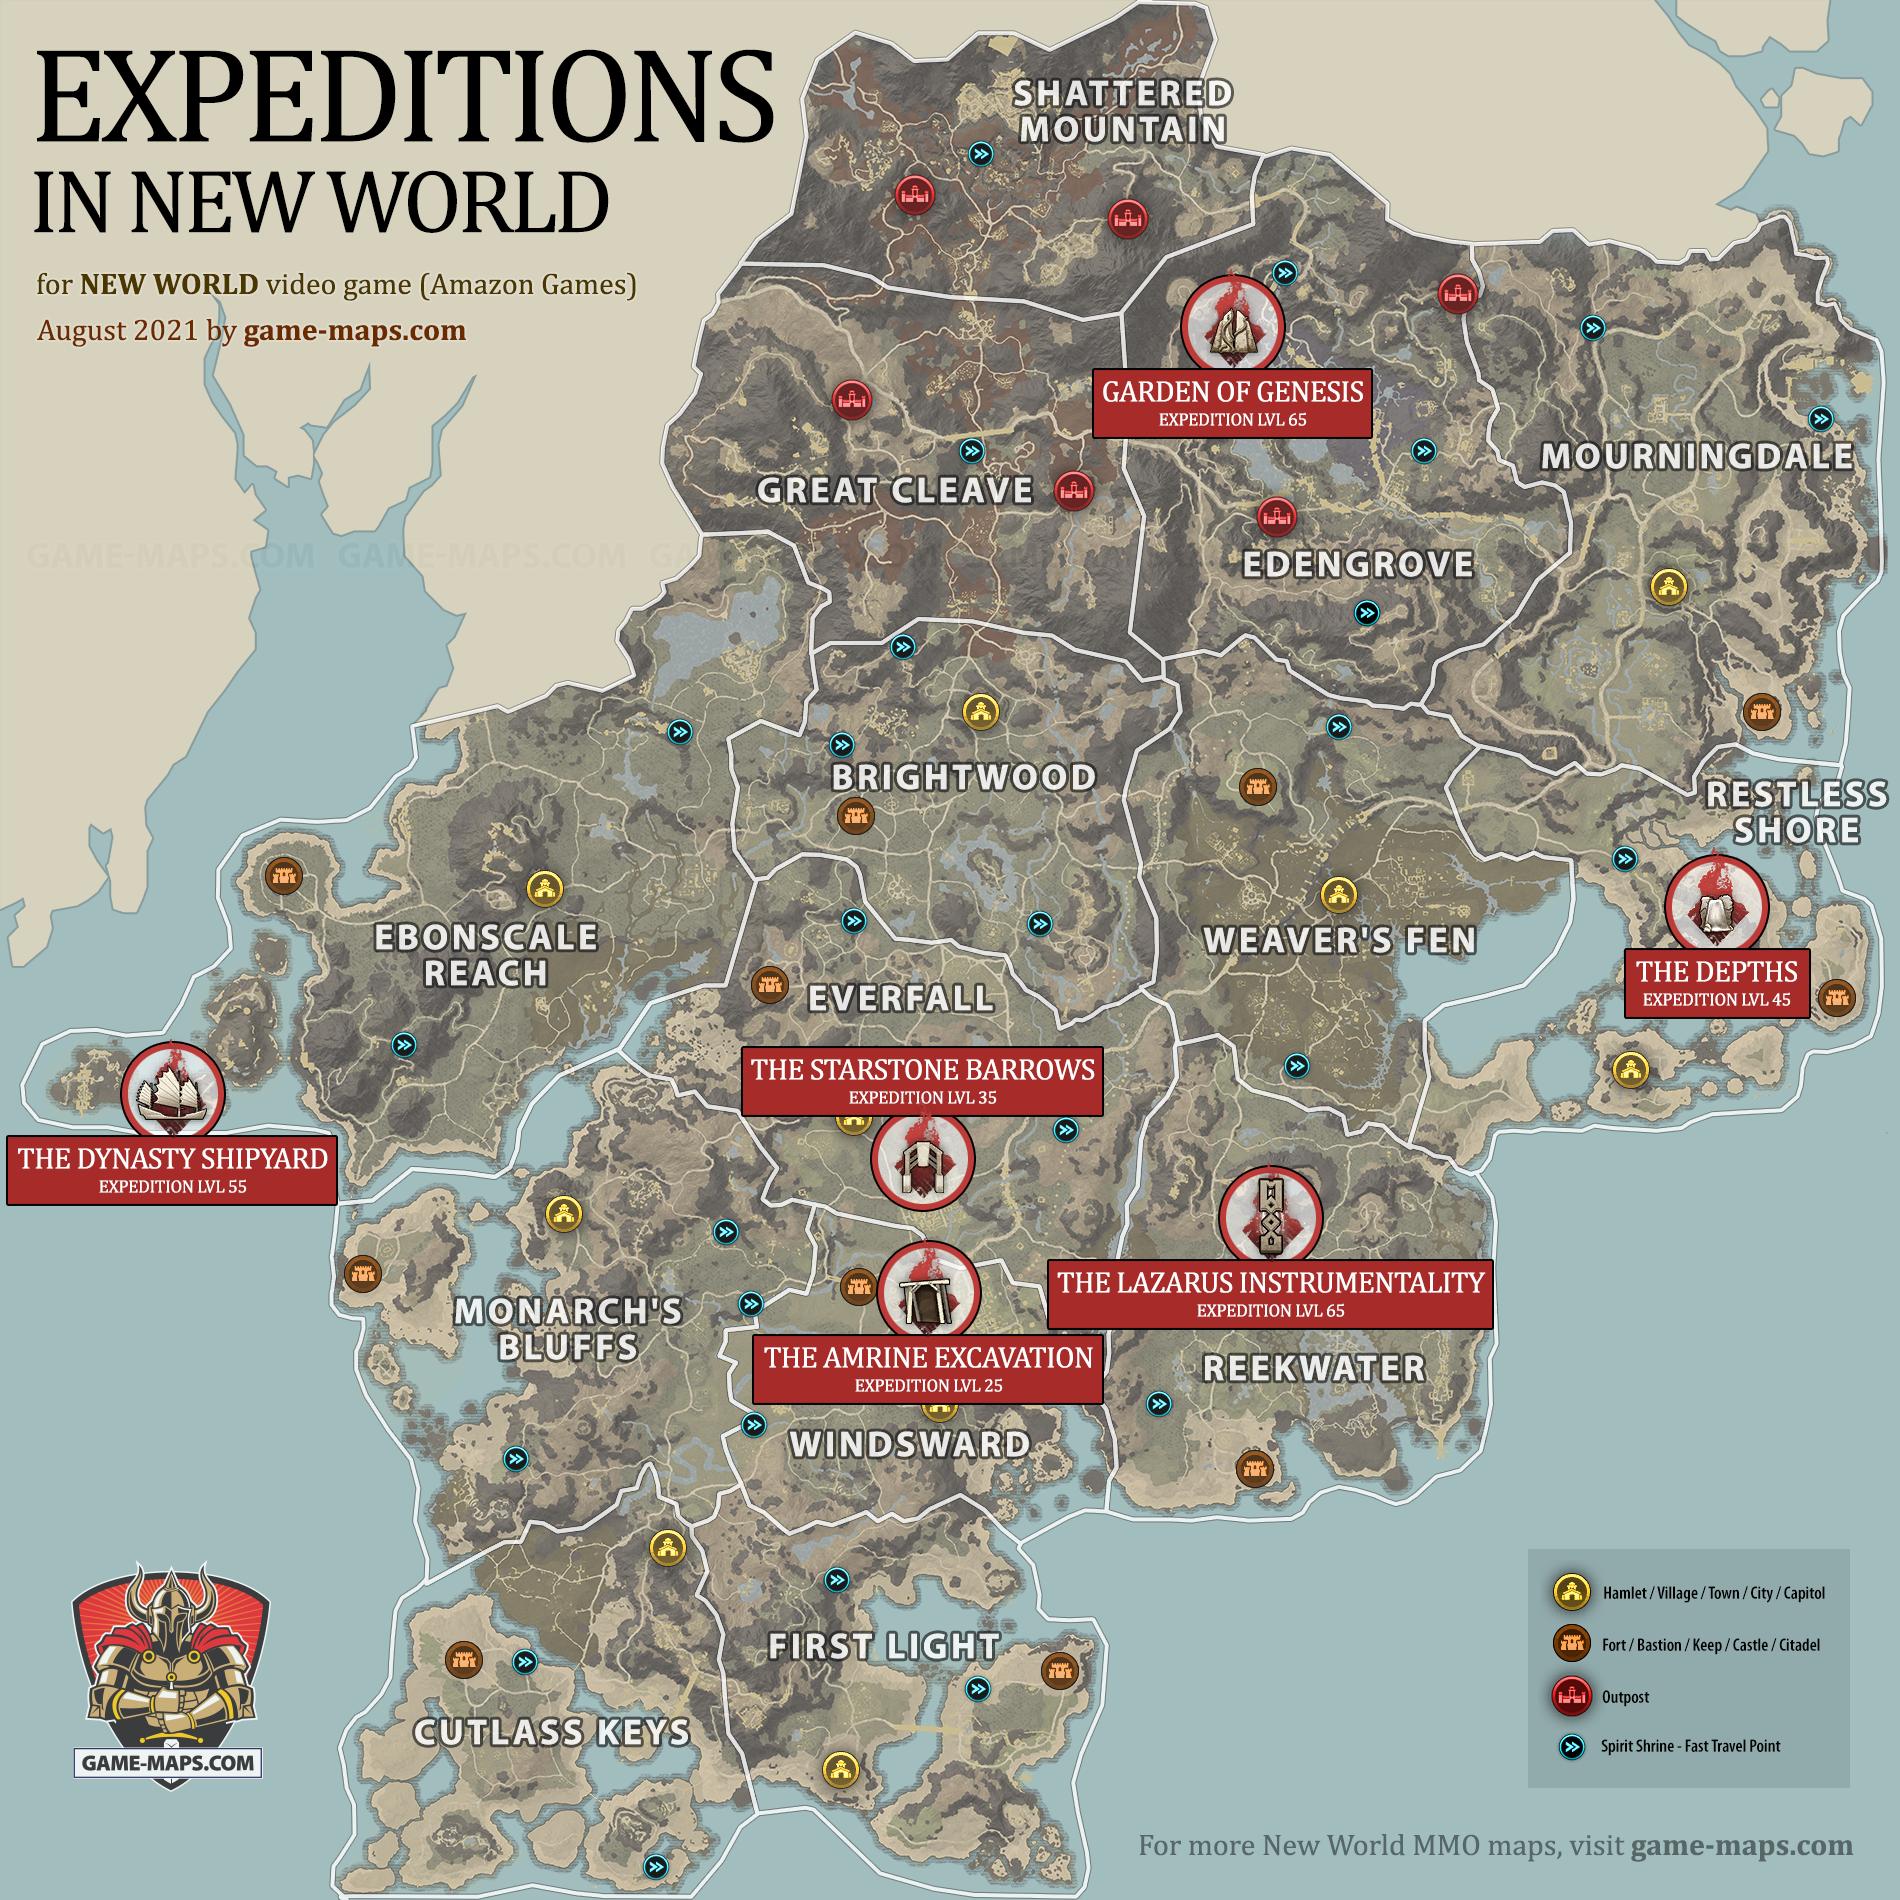 Map of Expeditions Location in Aeternum for New World MMO, The Amrine Excavation, The Starstone Barrows, The Depths, The Dynasty Shipyard, Garden of Genesis, The Lazarus Instrumentality